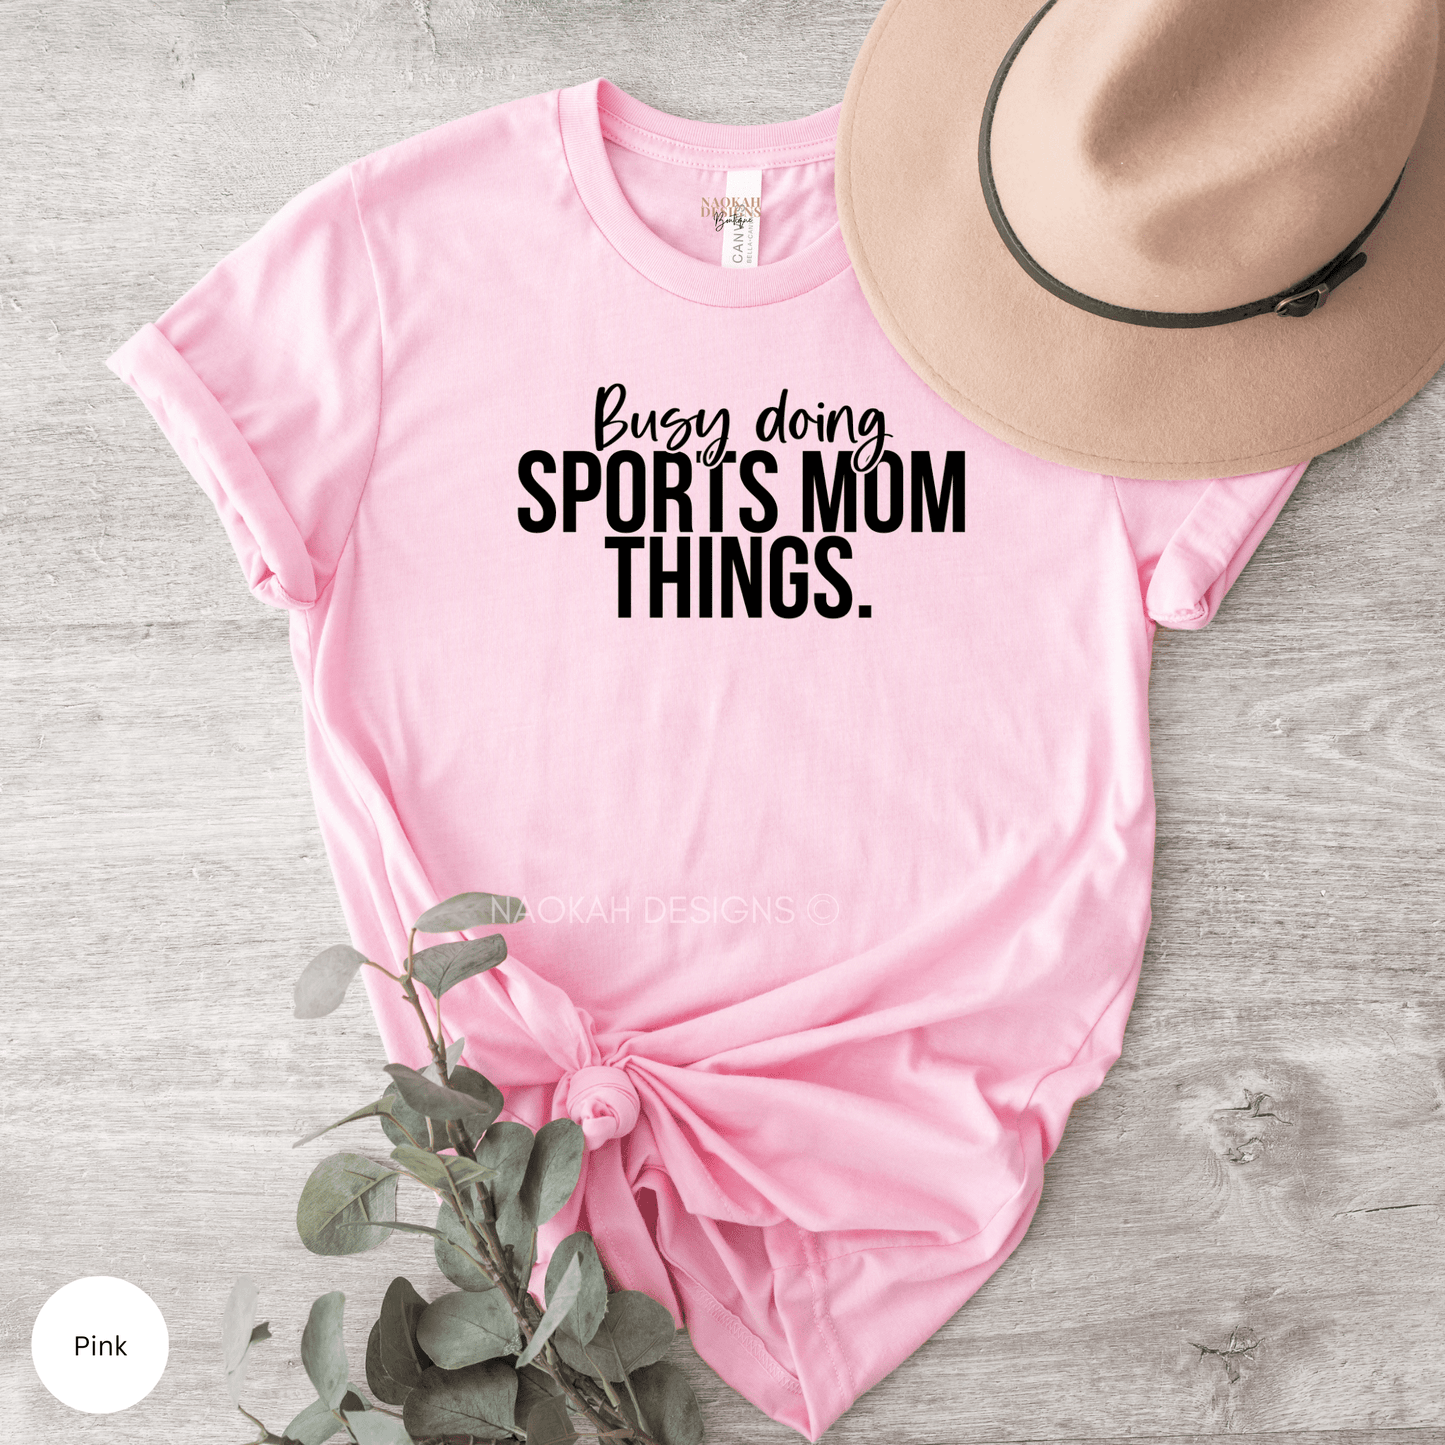 busy doing sports mom things shirt, gift for mom, sports mom shirt, game day shirts, mom life shirts, hockey mom shirt, football mom shirt, cheer mom shirt, soccer mom shirt, dance mom shirt, lacrosse mom shirt, karate mom shirt